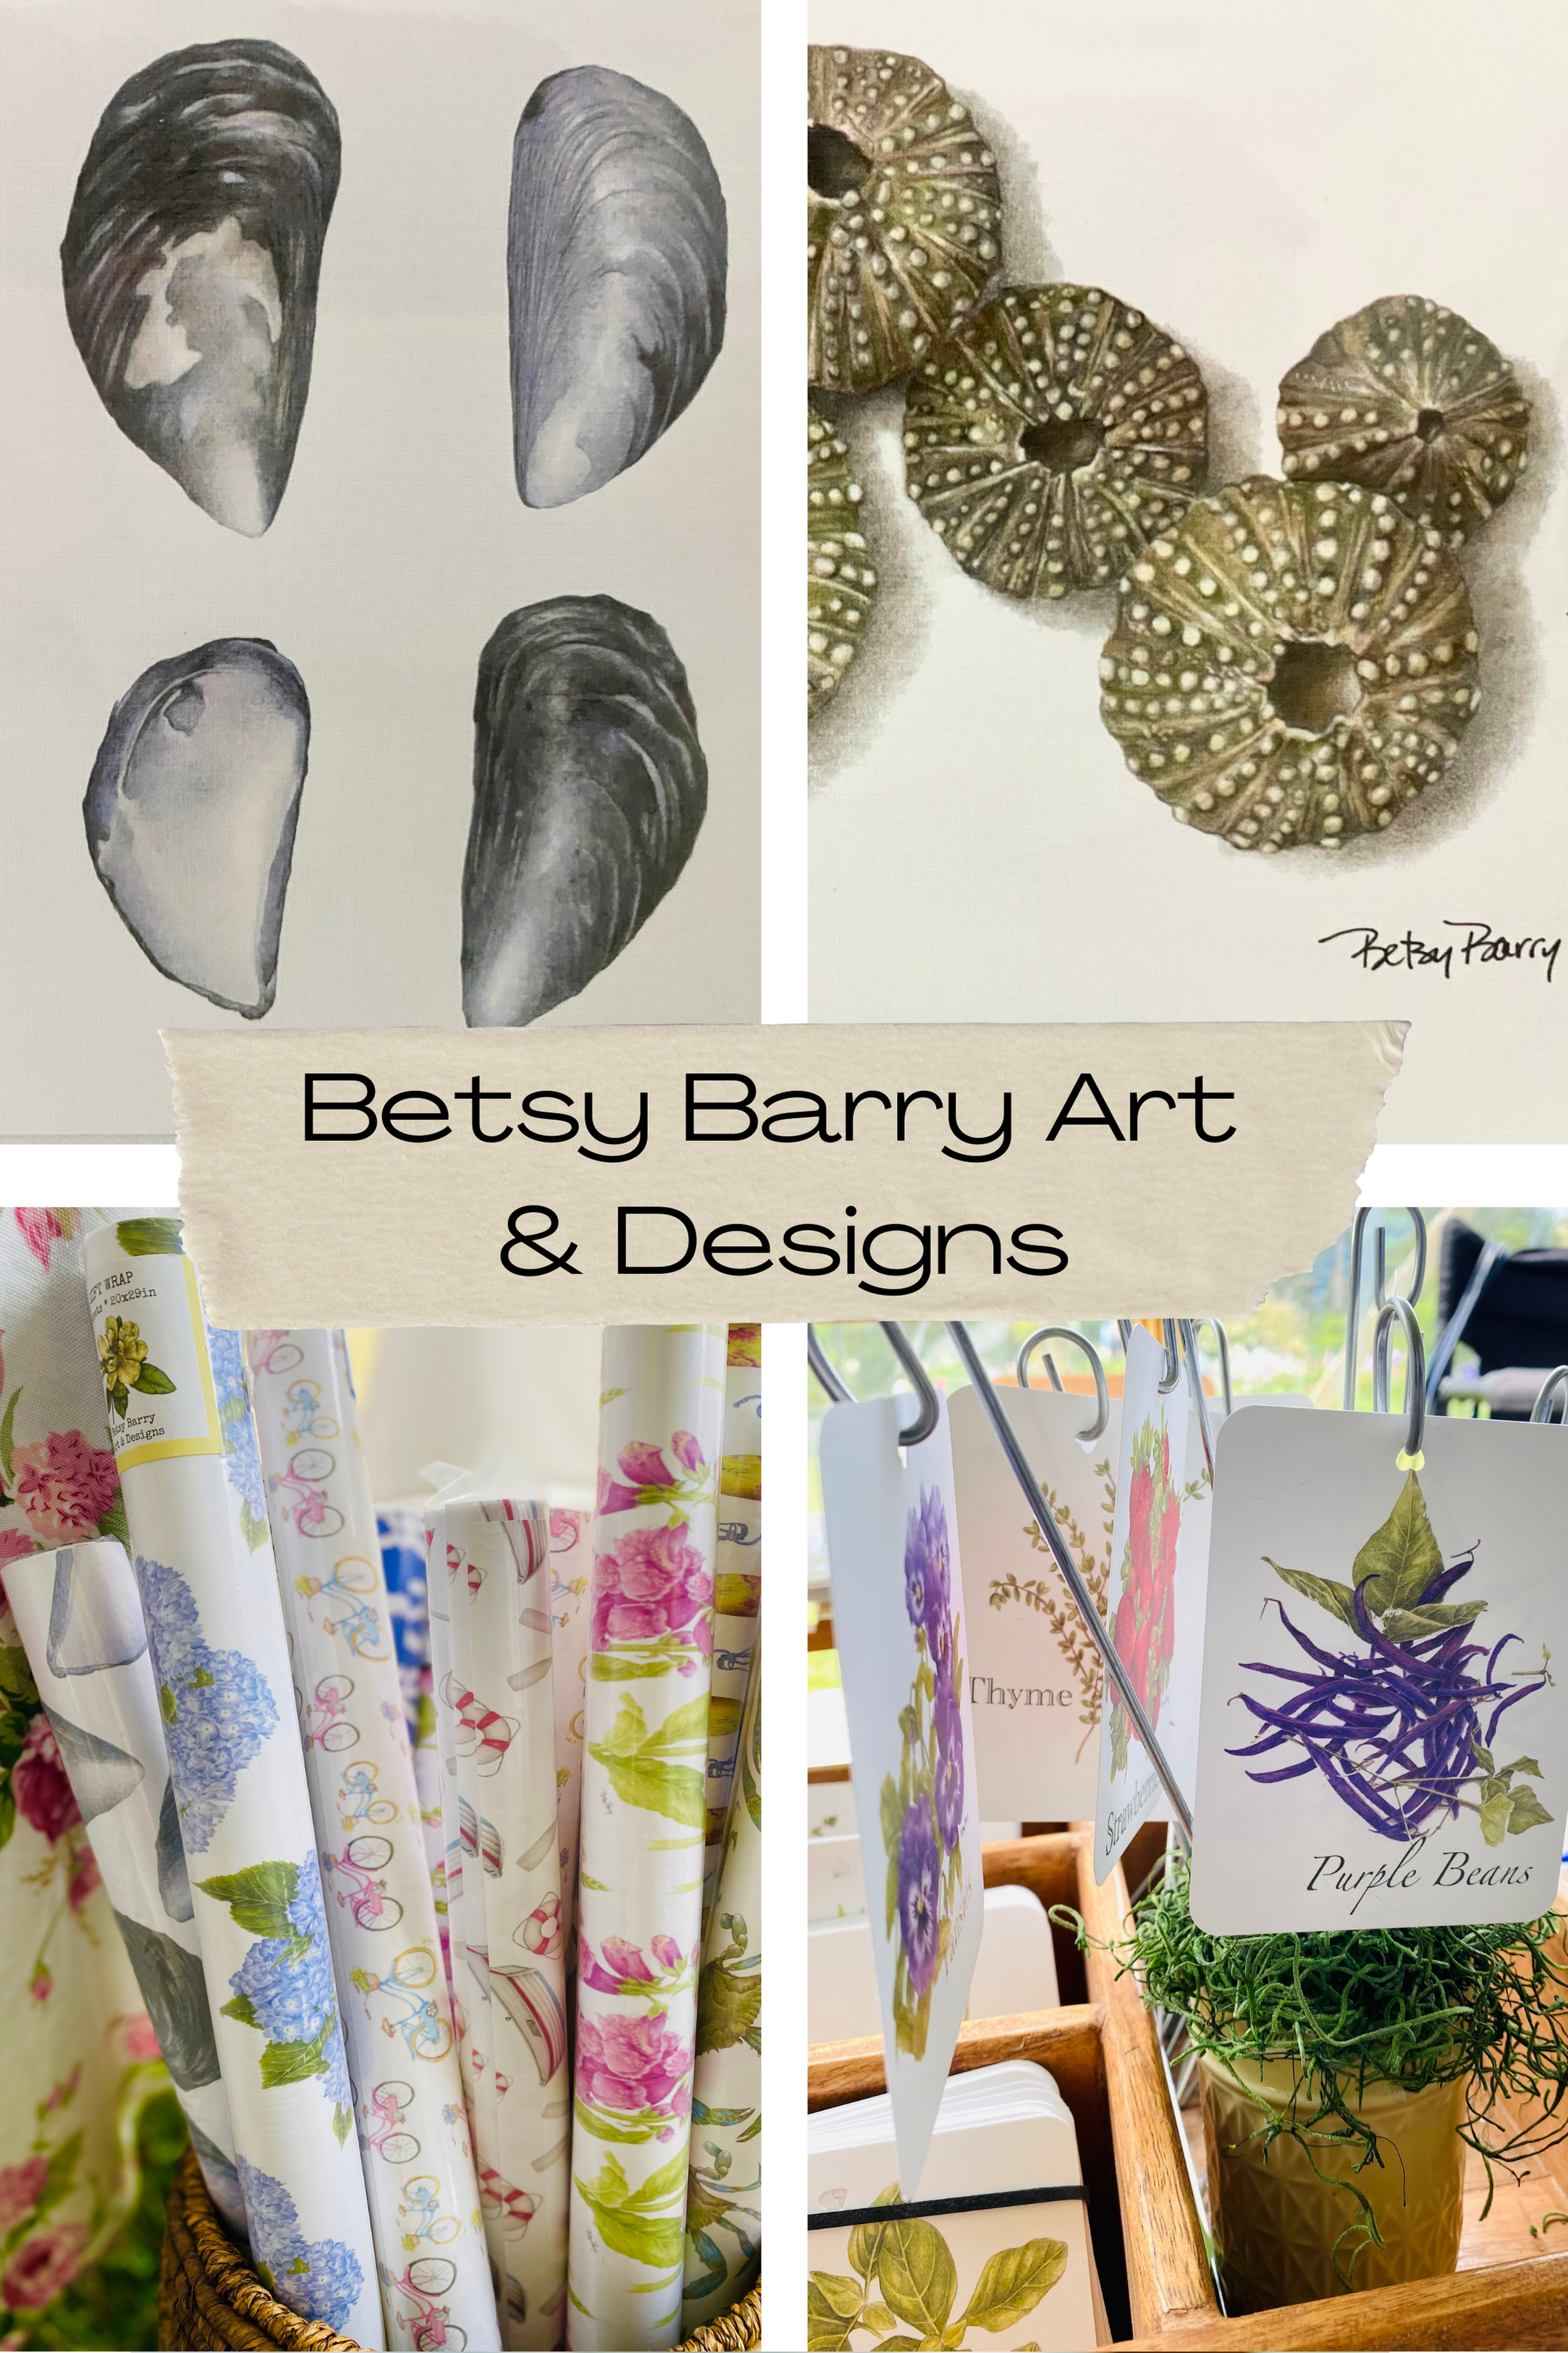 Betsy Barry Art & Designs from Fine Day Fair Home & Garden Show